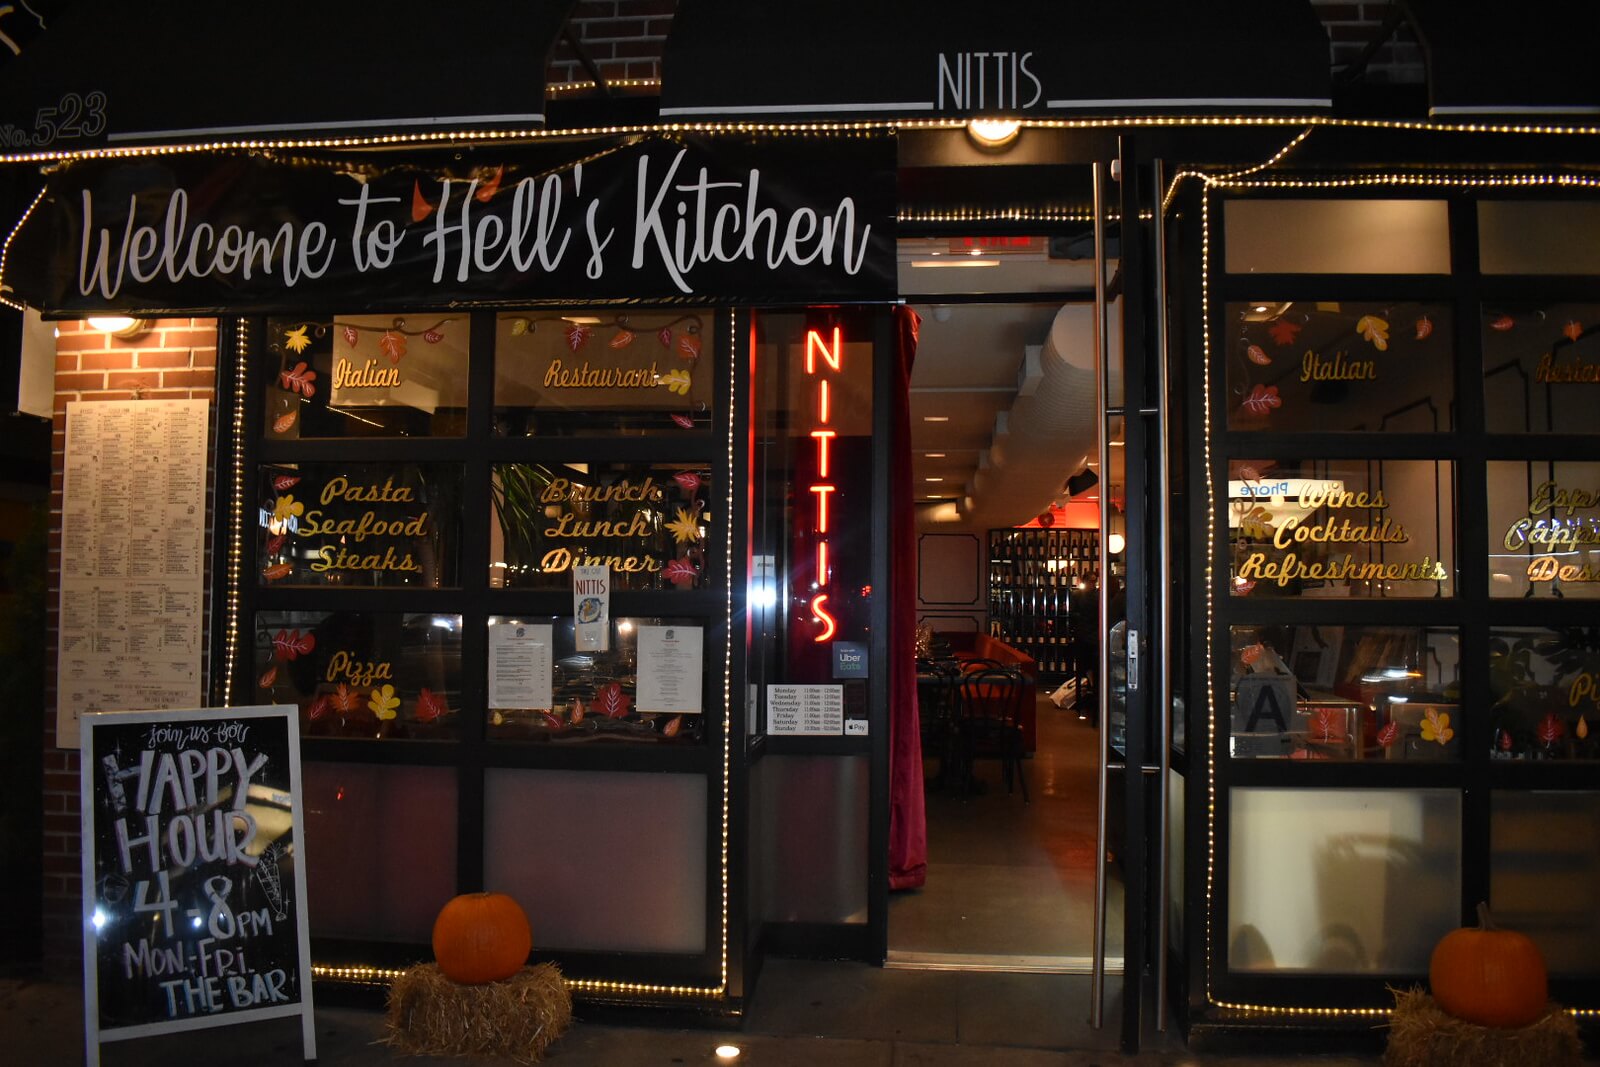 Entrance to restaurant with a 'Welcome to Hells Kitchen' banner hanging on the awning